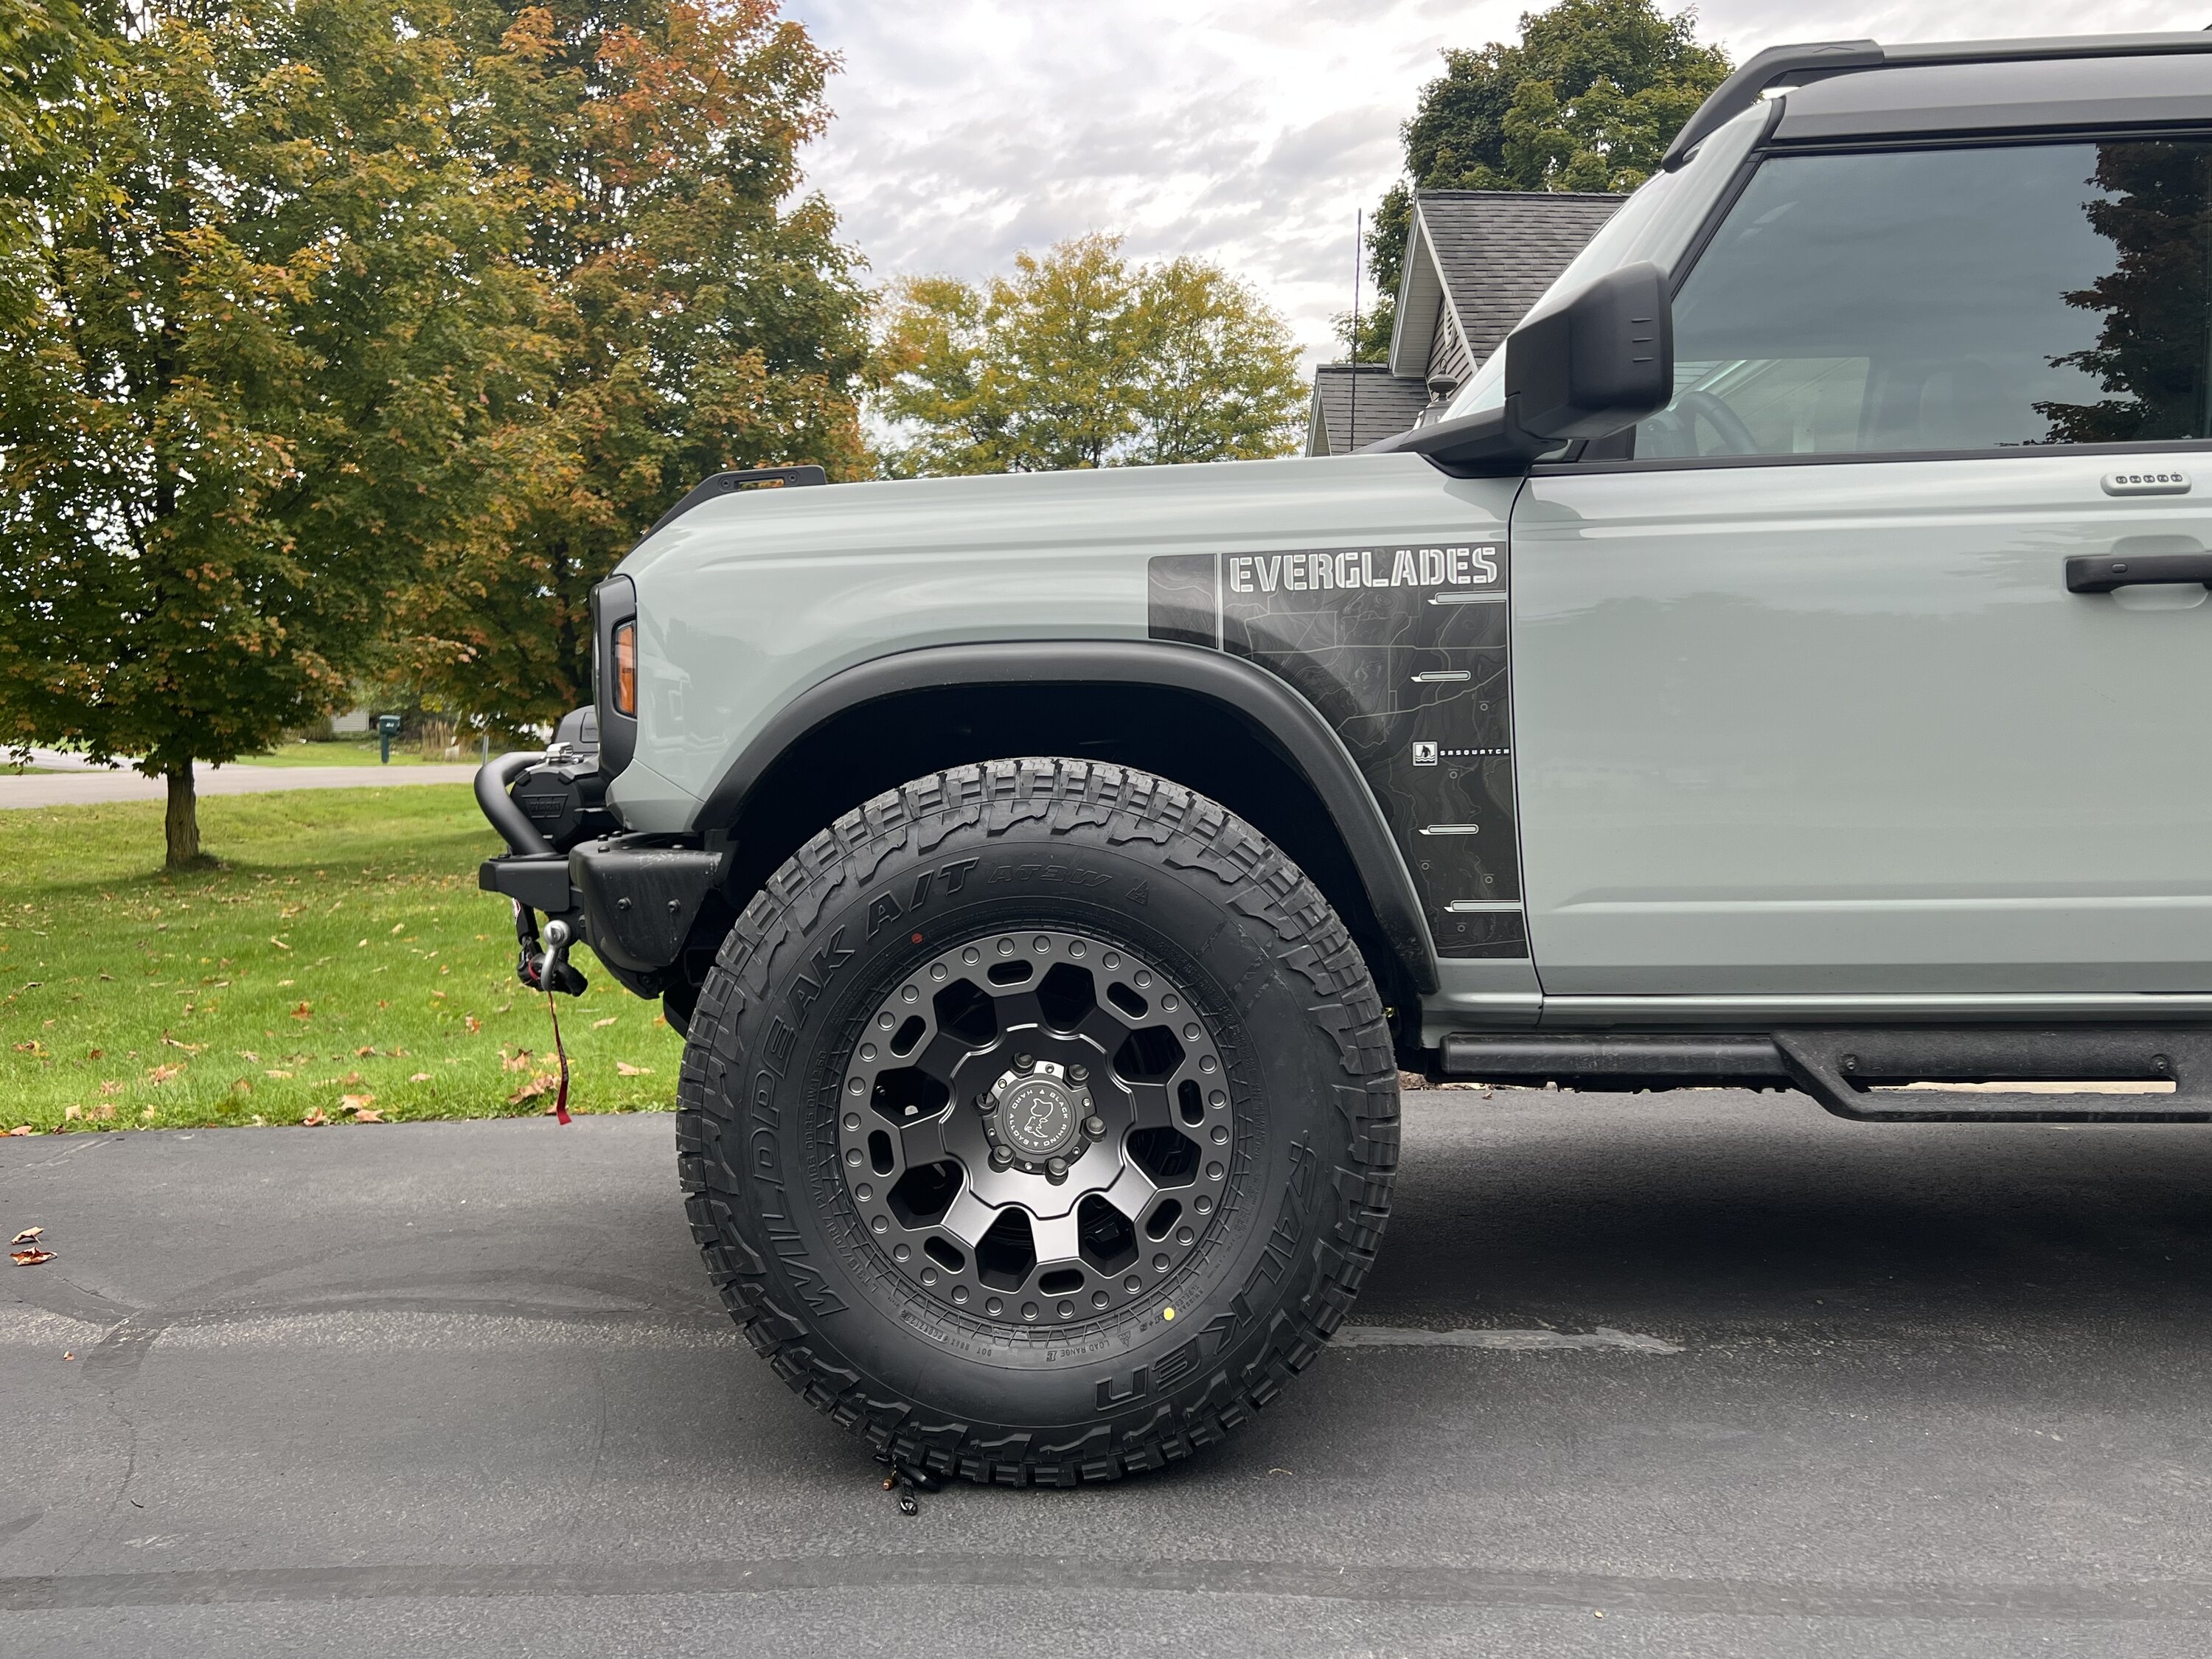 Ford Bronco Everglades style aftermarket wheels and snorkel ? 648F6BB8-2A75-4E18-AD86-7E154ADFCF36